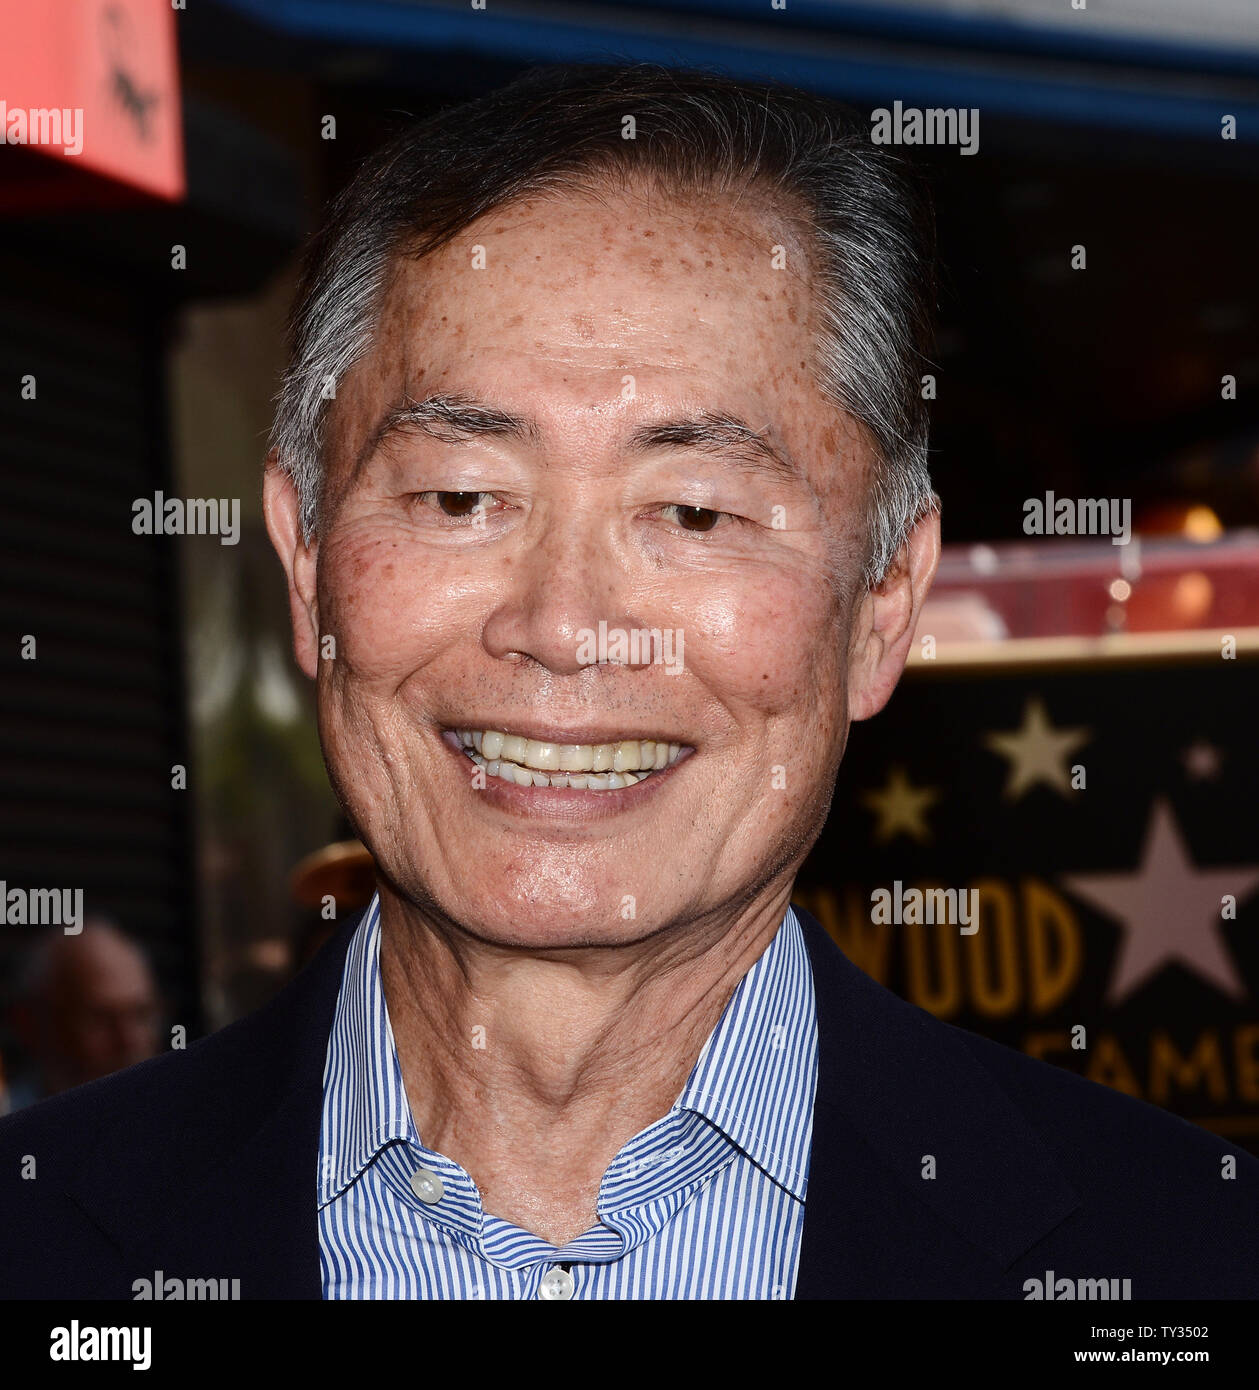 Actor George Takei attends an unveiling ceremony honoring actor Walter Koenig with the 2,479th star on the Hollywood Walk of Fame in Los Angeles on September 10, 2012. Koenig, who portrayed the Russian character 'Chekov', is the final member of the 'Star Trek' television show to receive a star.   UPI/Jim Ruymen Stock Photo